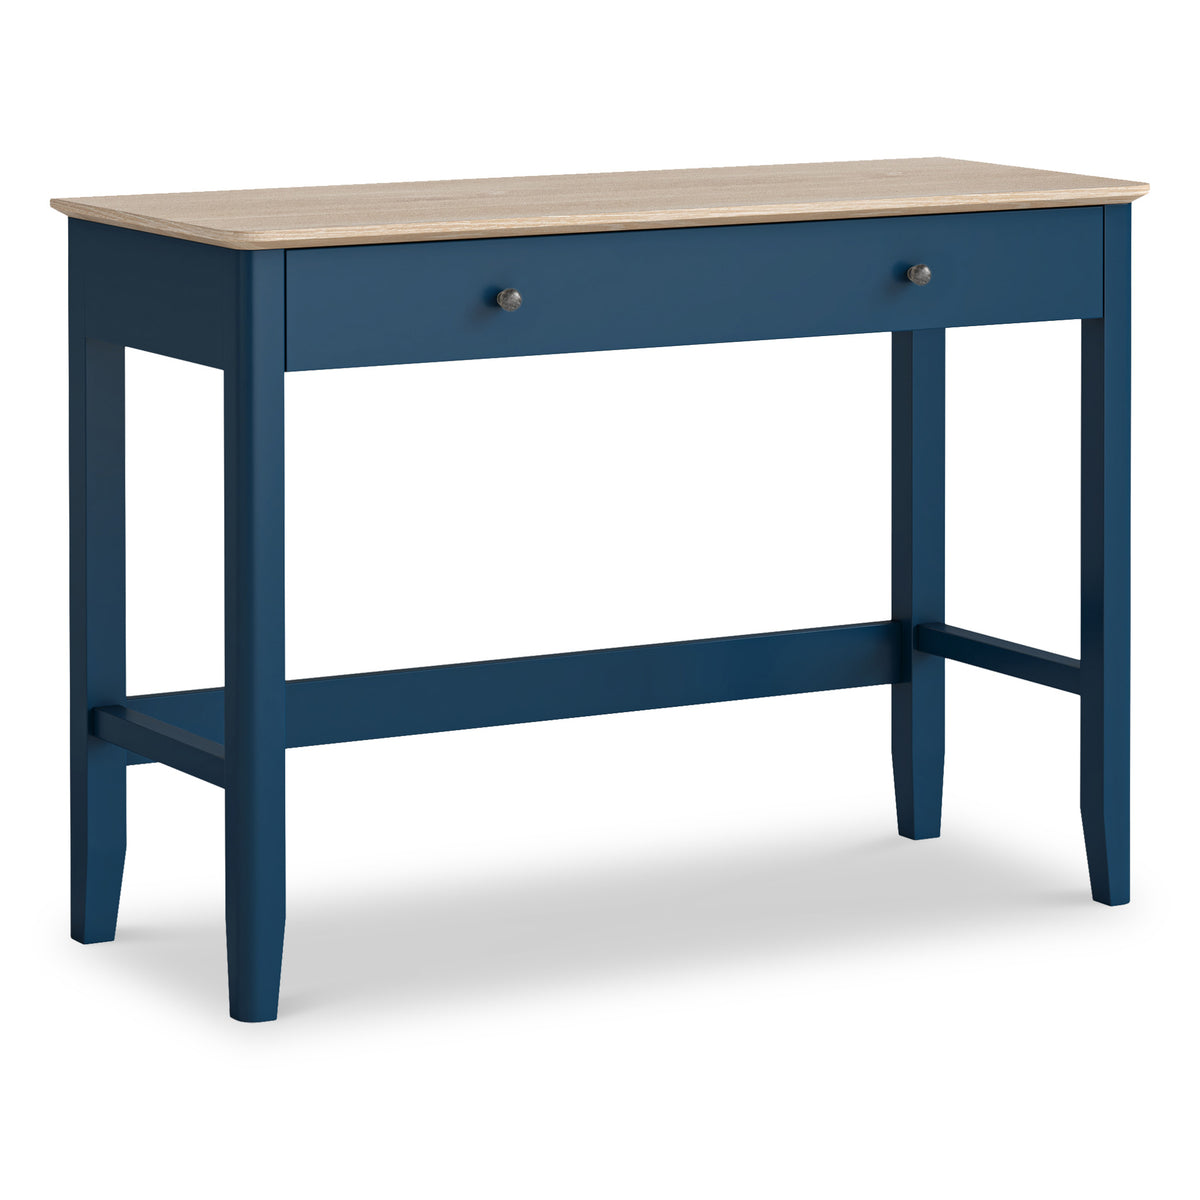 Penrose Navy Blue Home Office Desk with metal handles from Roseland Furniture